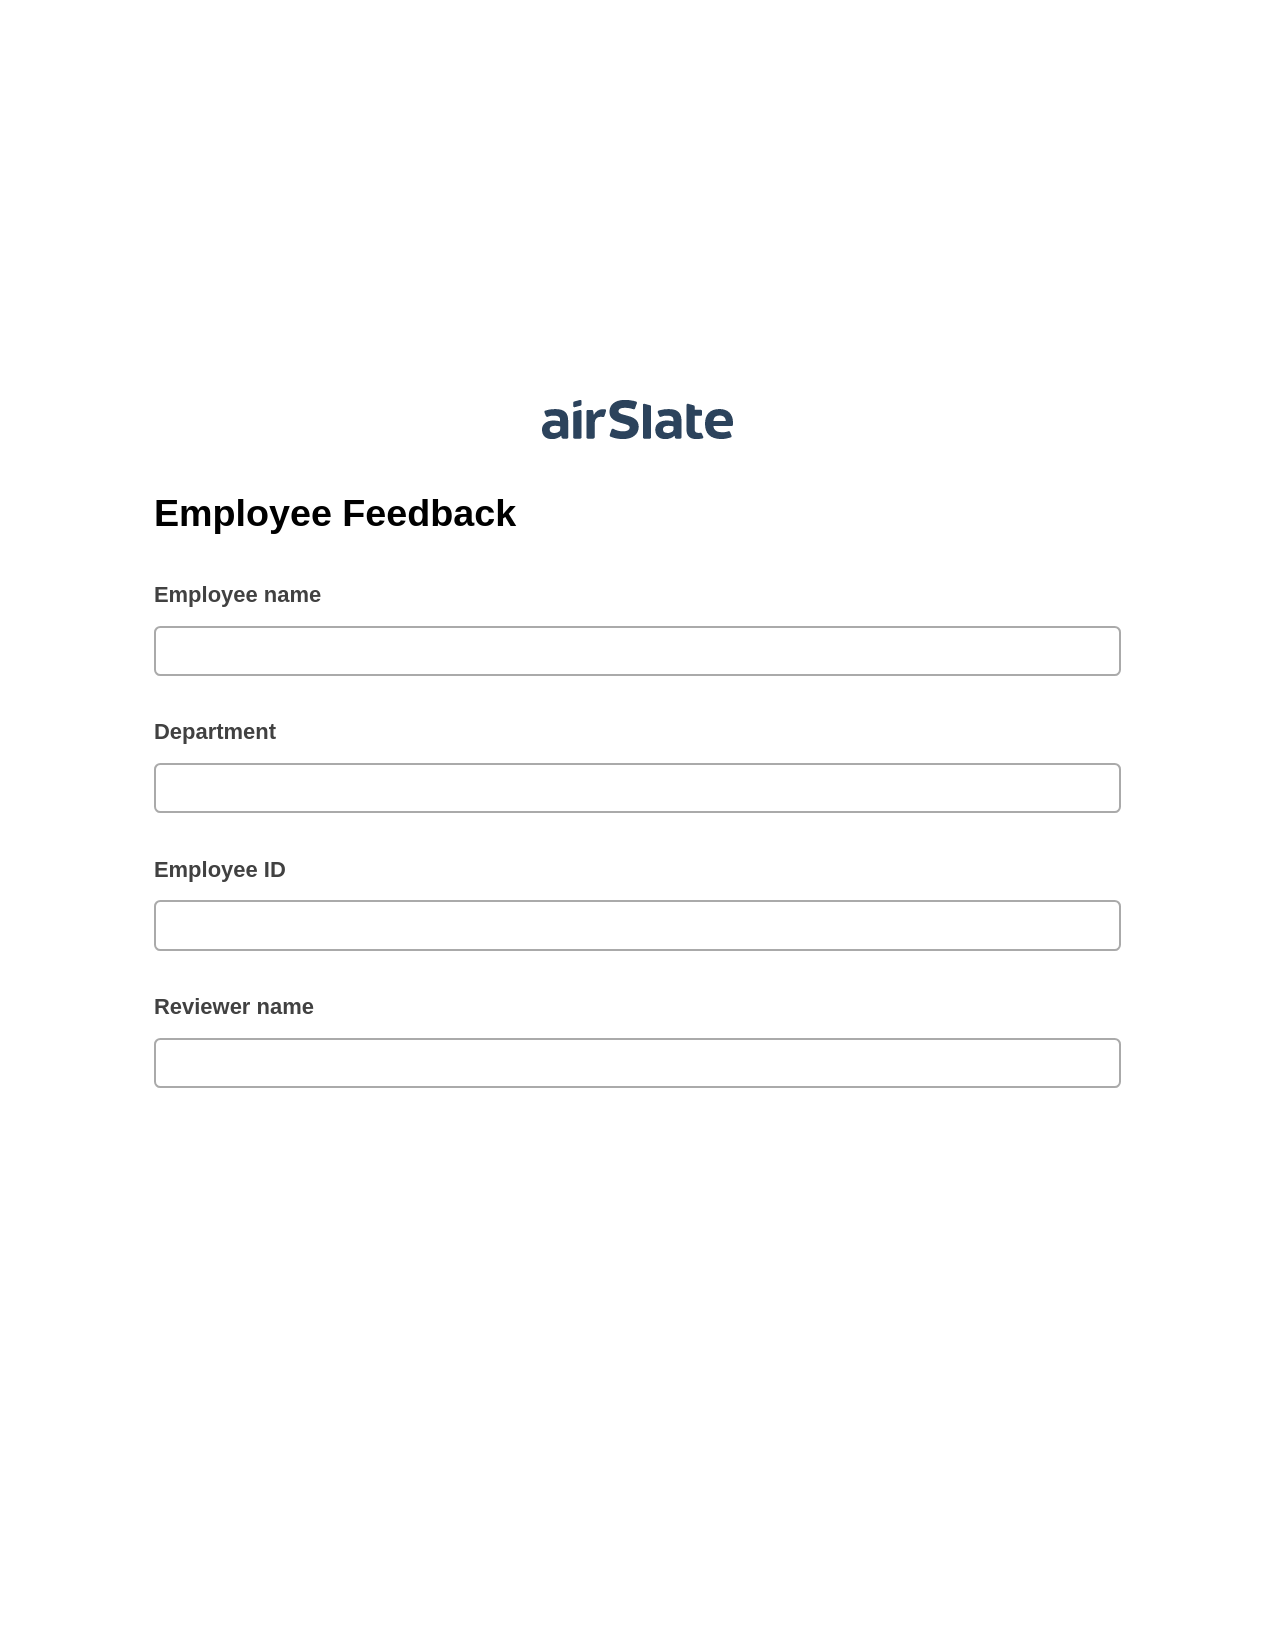 Employee Feedback Pre-fill from another Slate Bot, Document Hide Bot, Export to Excel 365 Bot